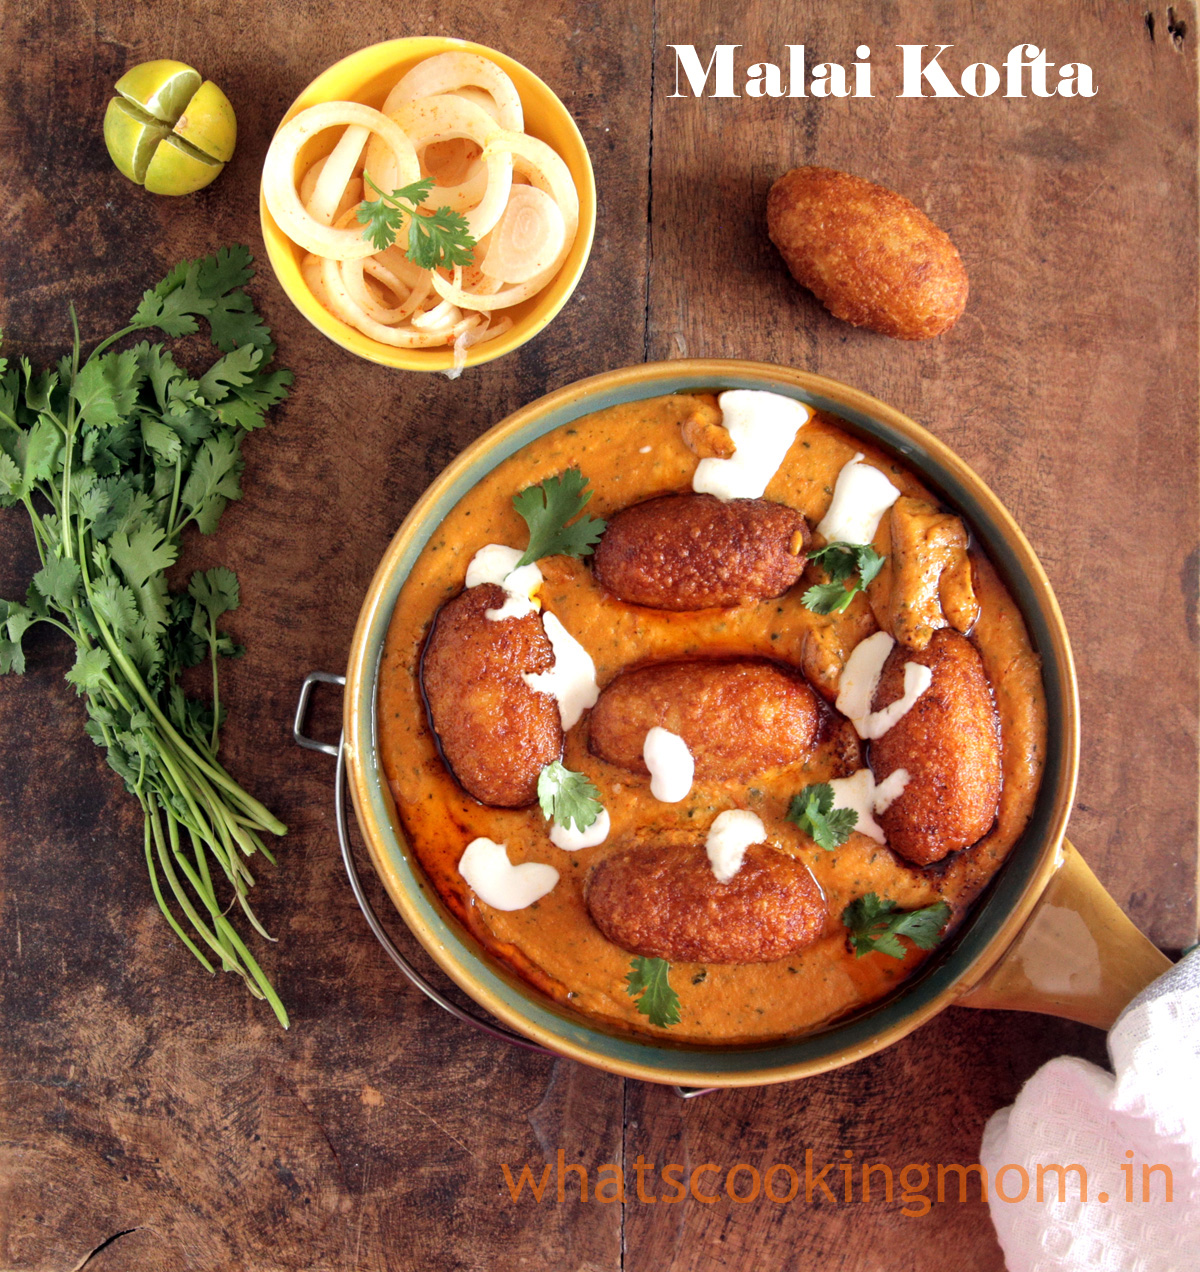 Malai Kofta served in a bowl garnished with cream and coriander leaves and onion salad